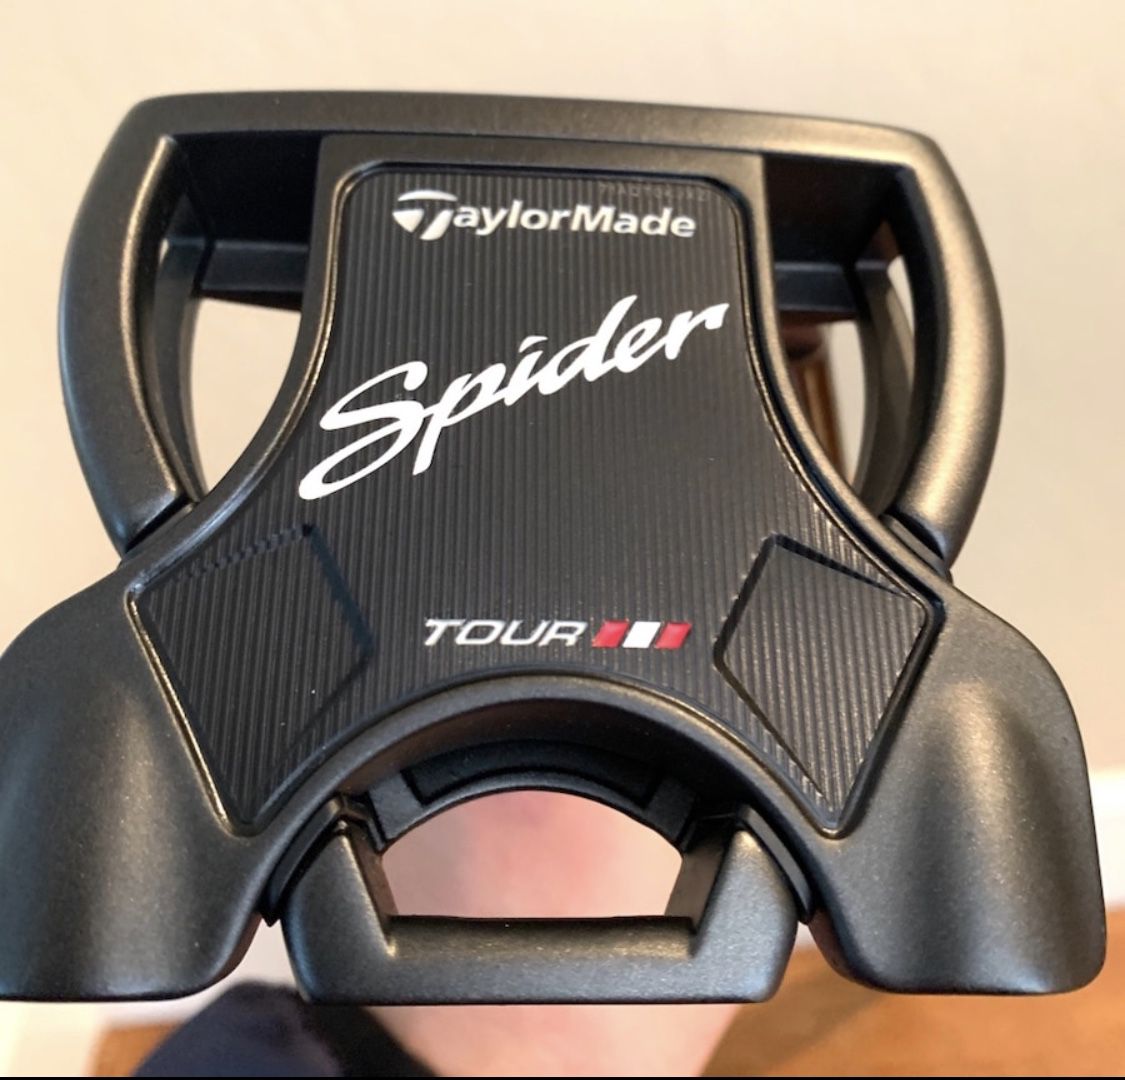 TaylorMade spider tour